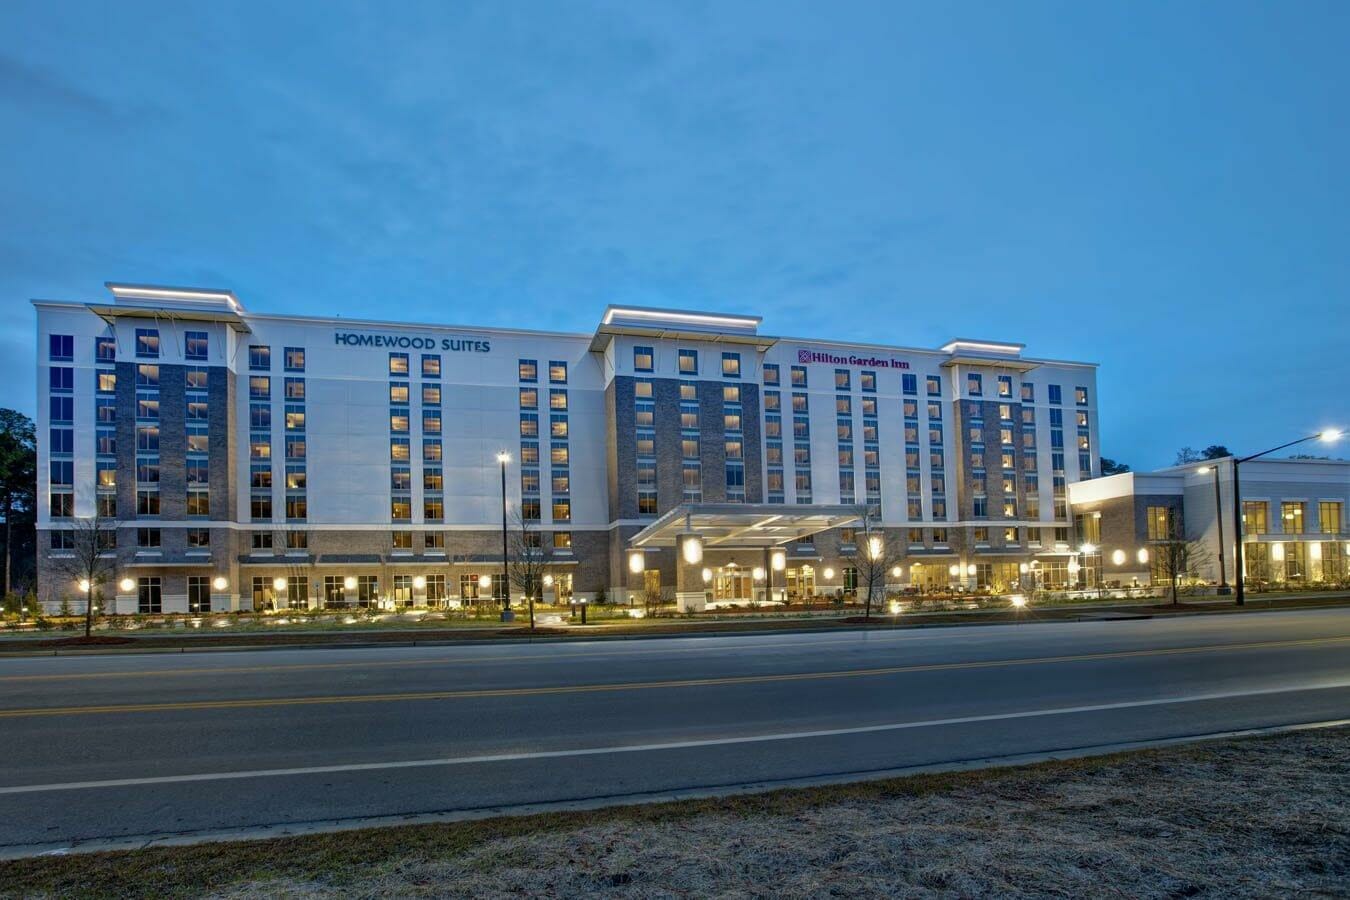 Homewood Suites Conference Center - Summerville - Lowcountry Hotels